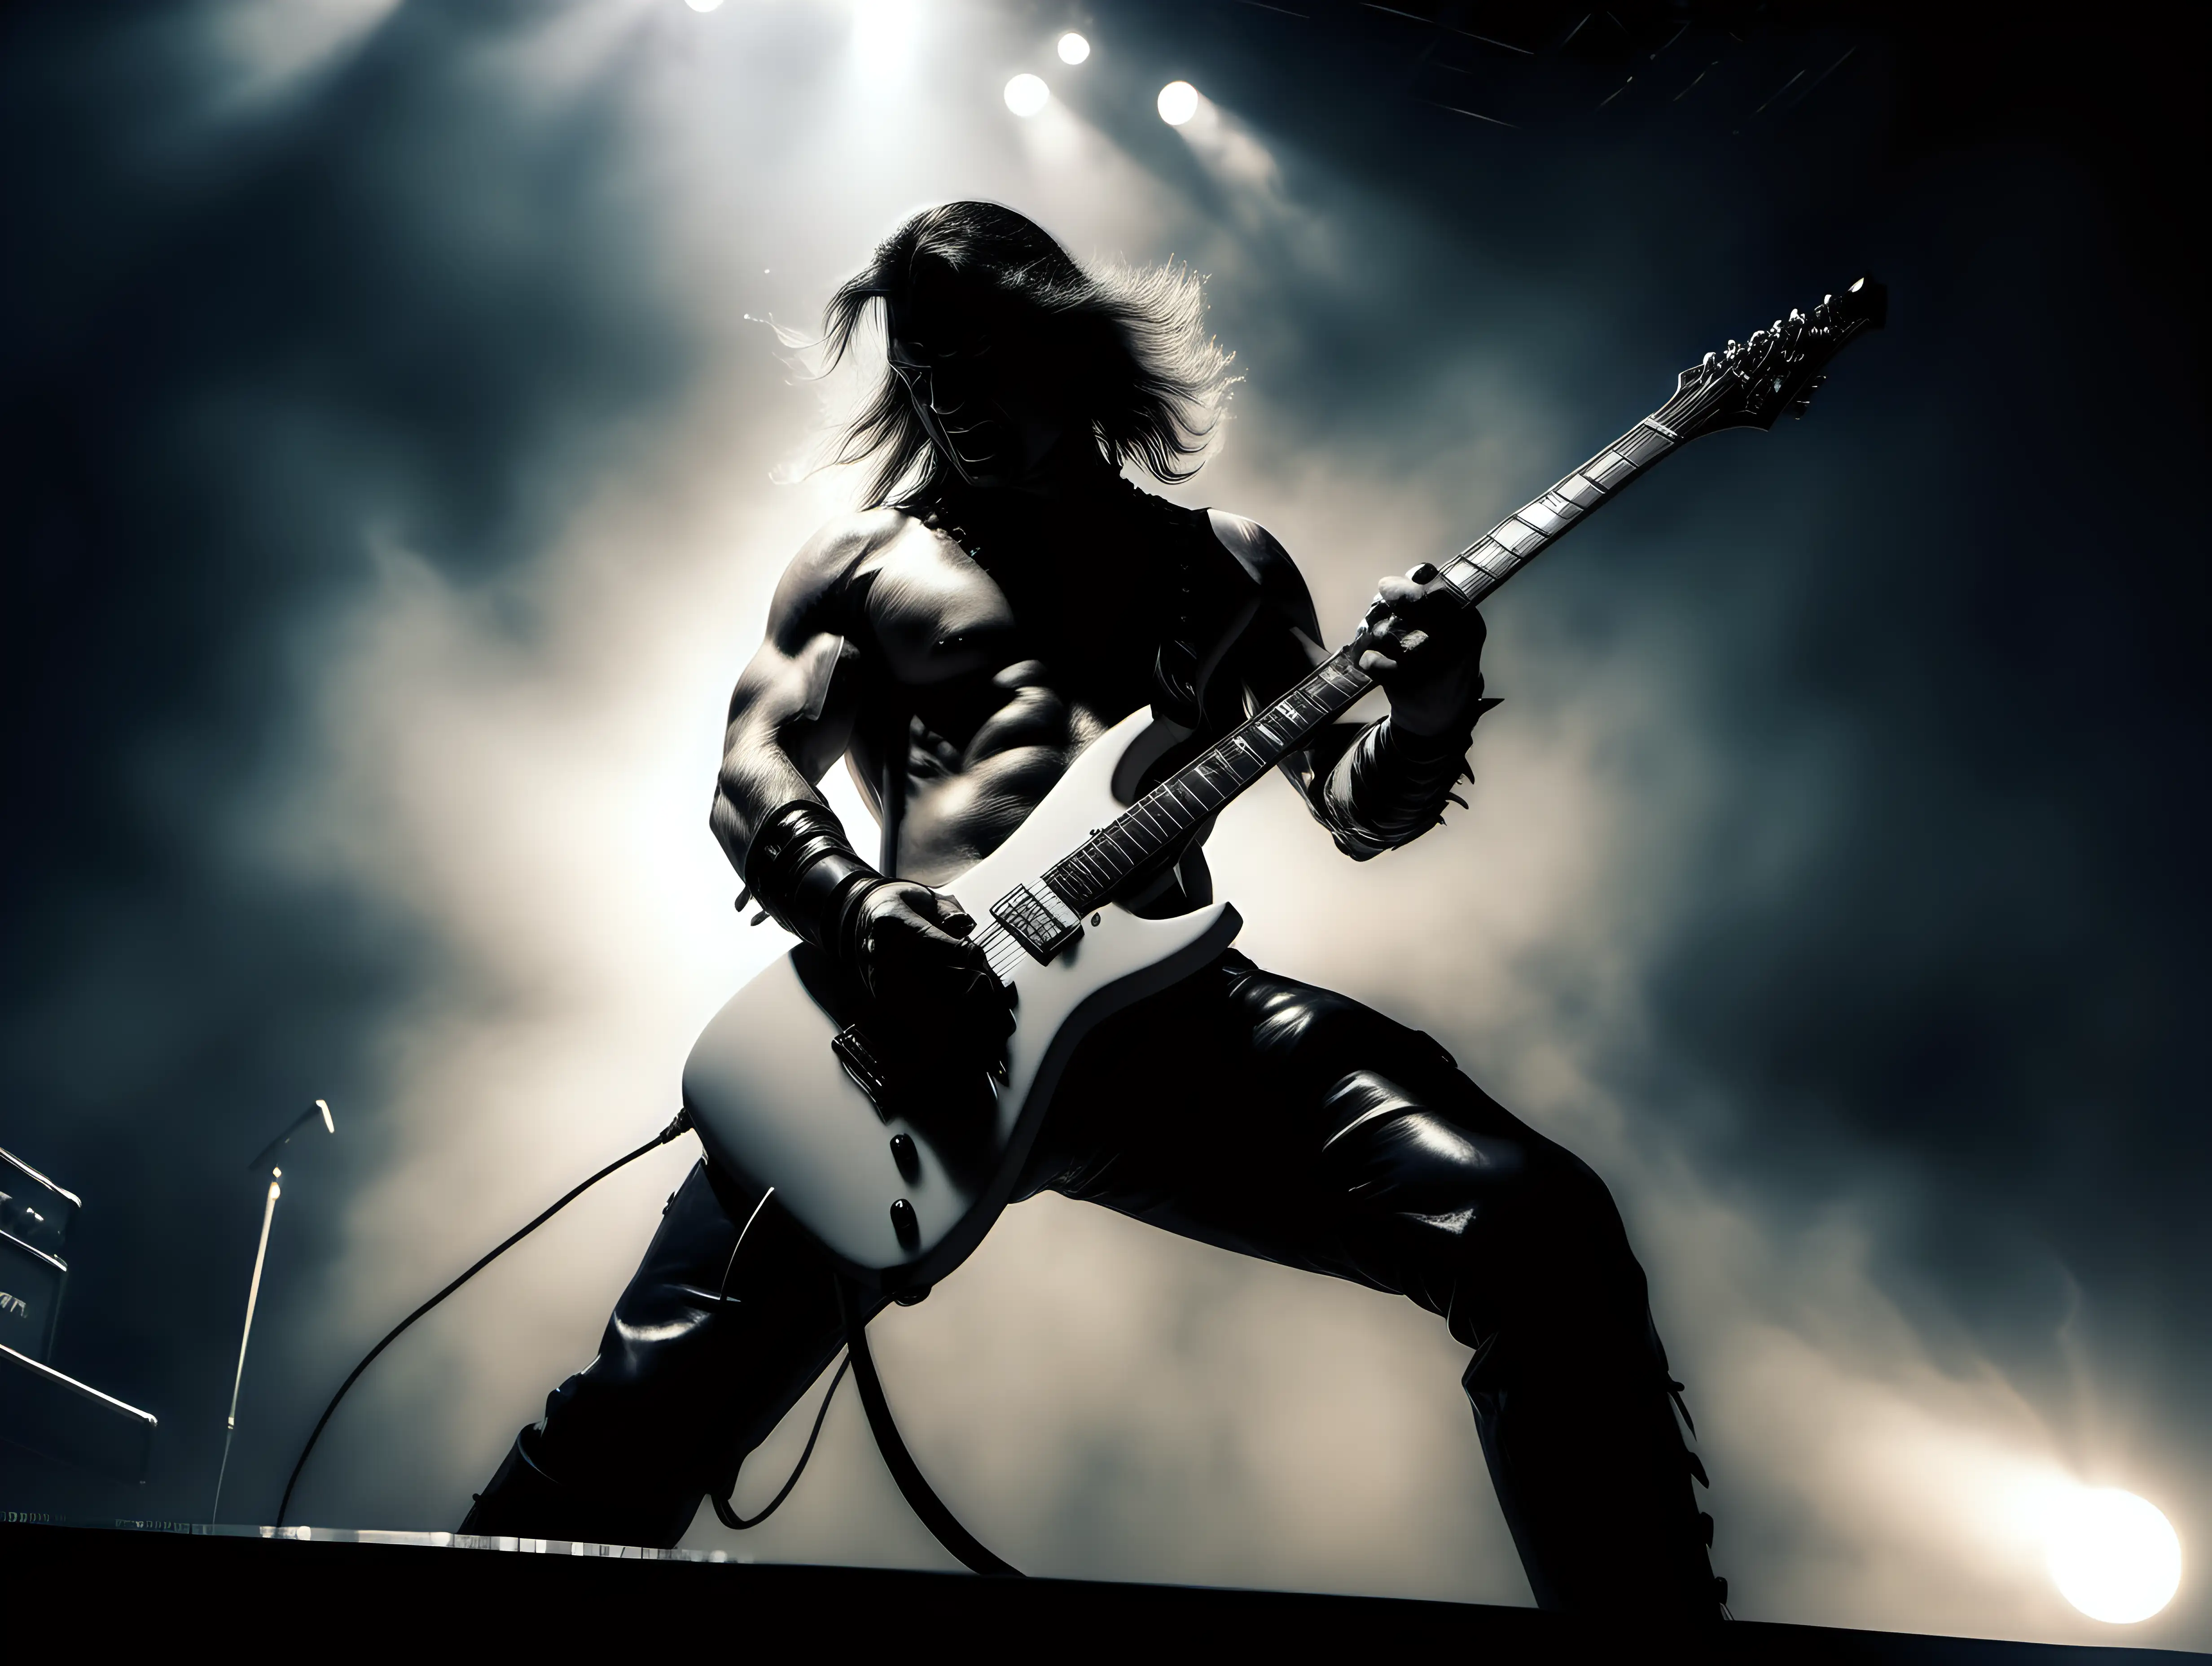 Epic Heavy Metal Guitar Solo with Dazzling Backlight Frank Frazetta Style